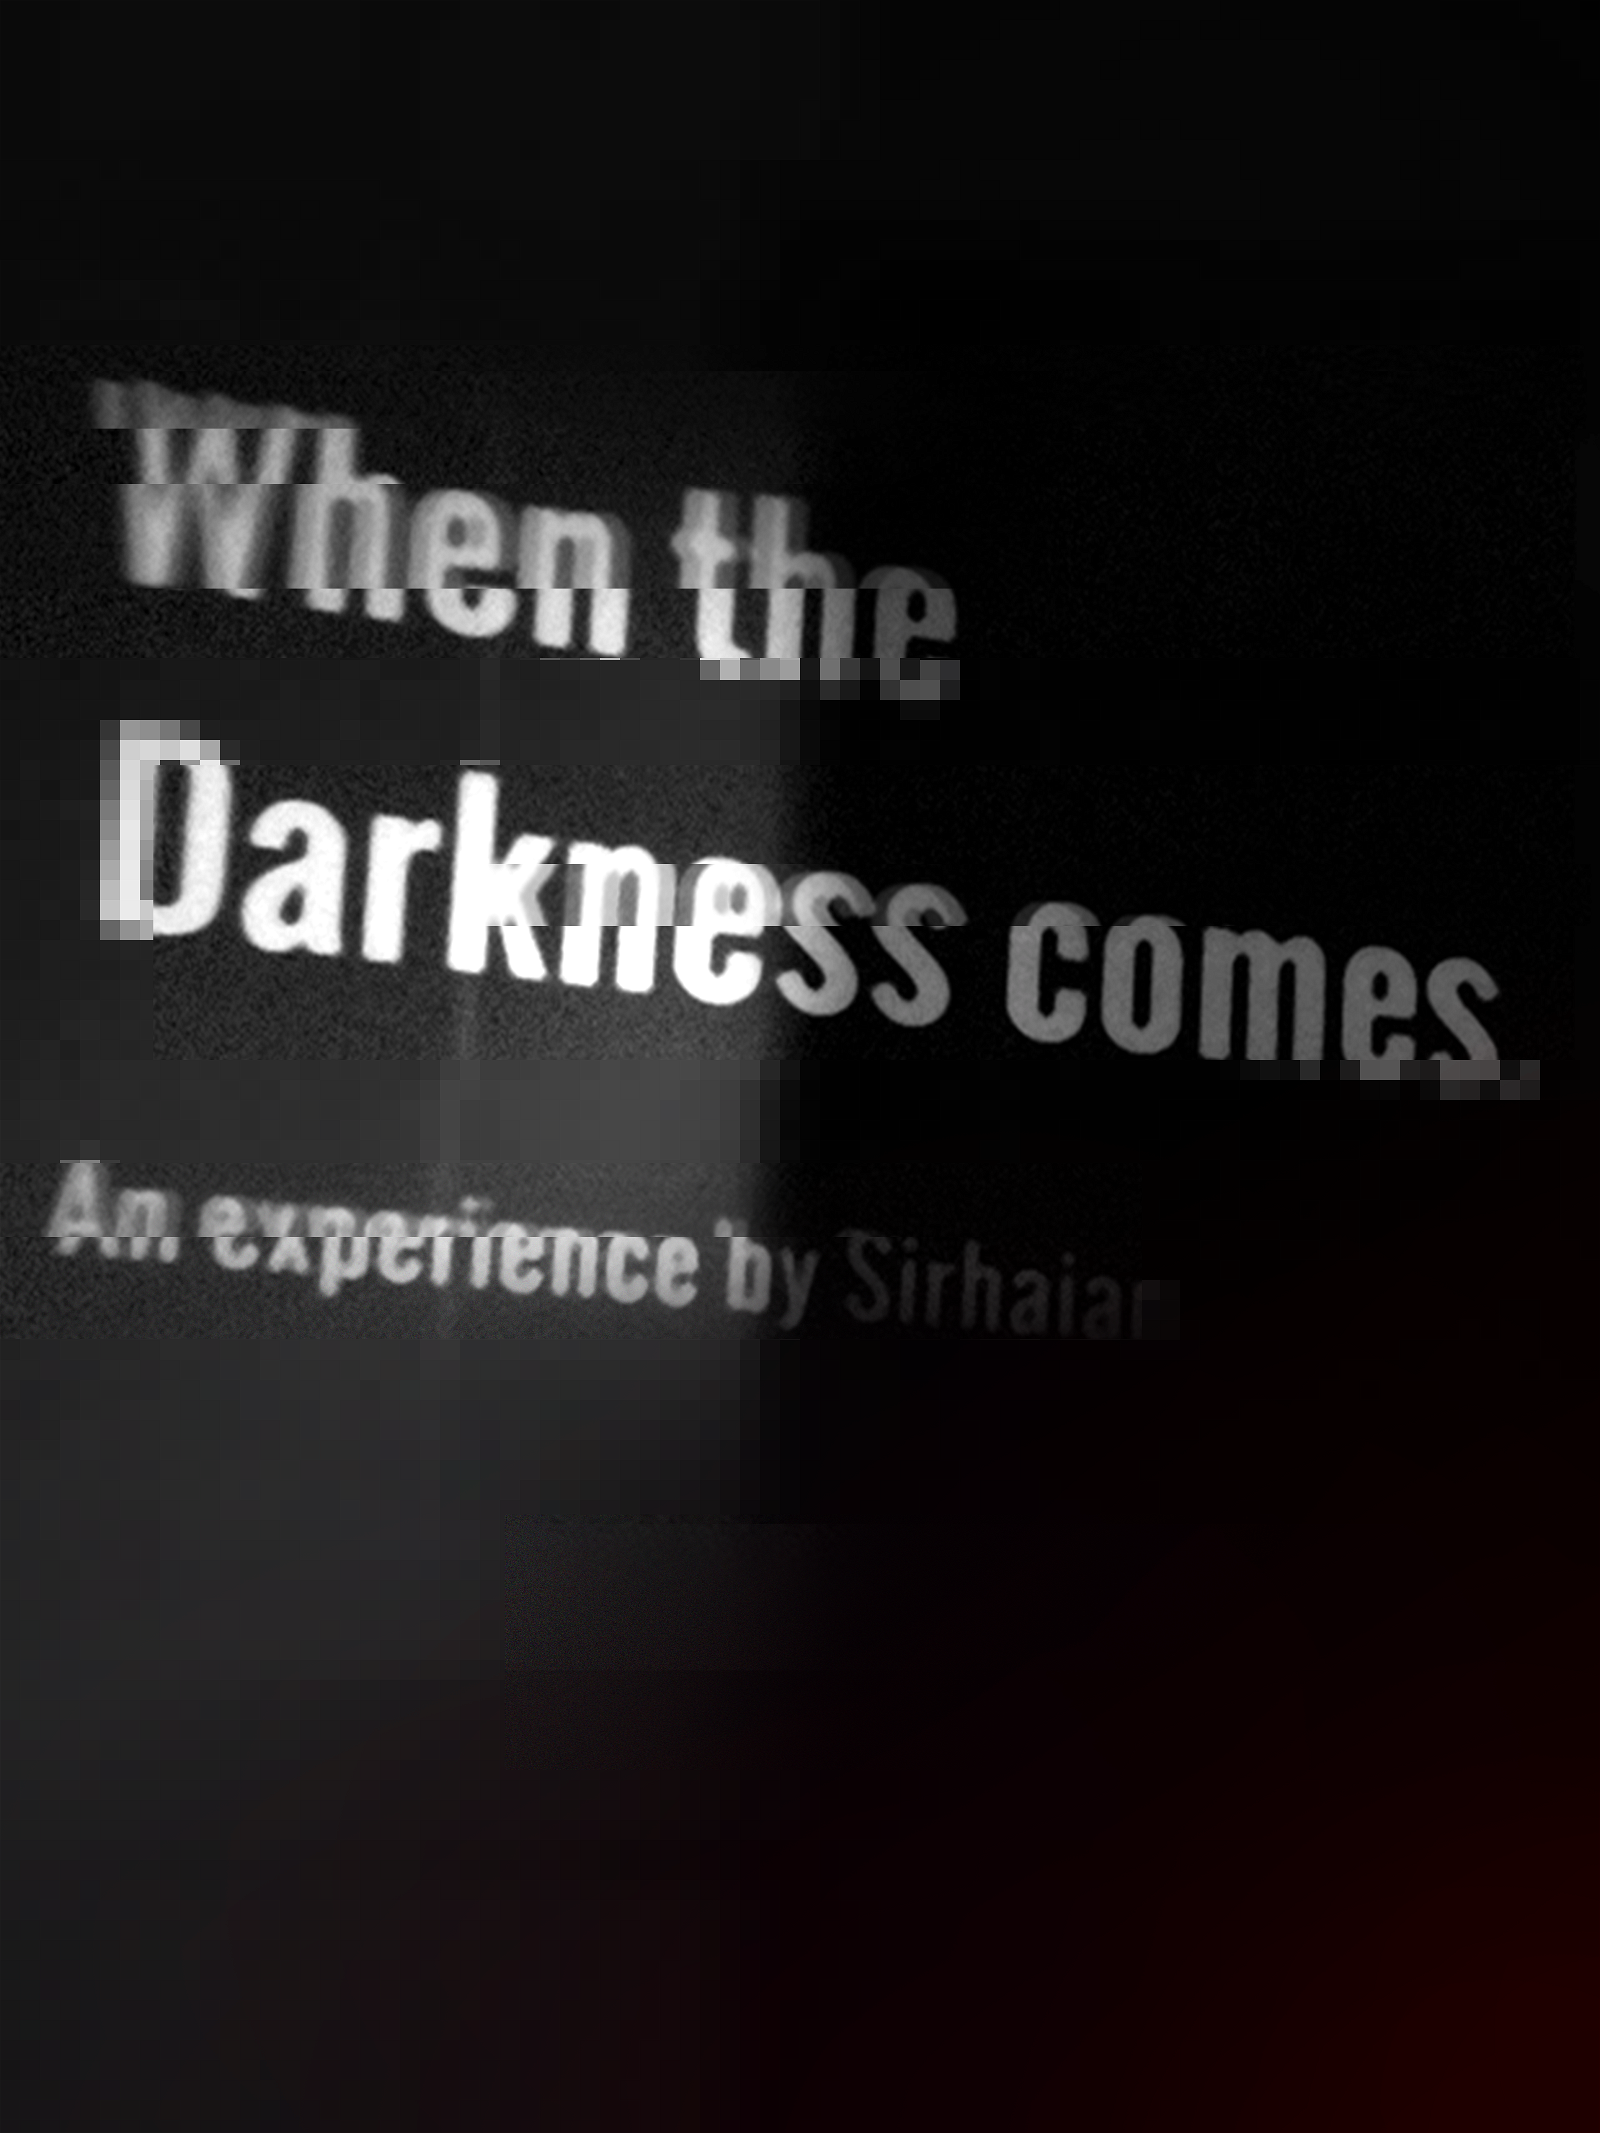 Image of When the Darkness comes